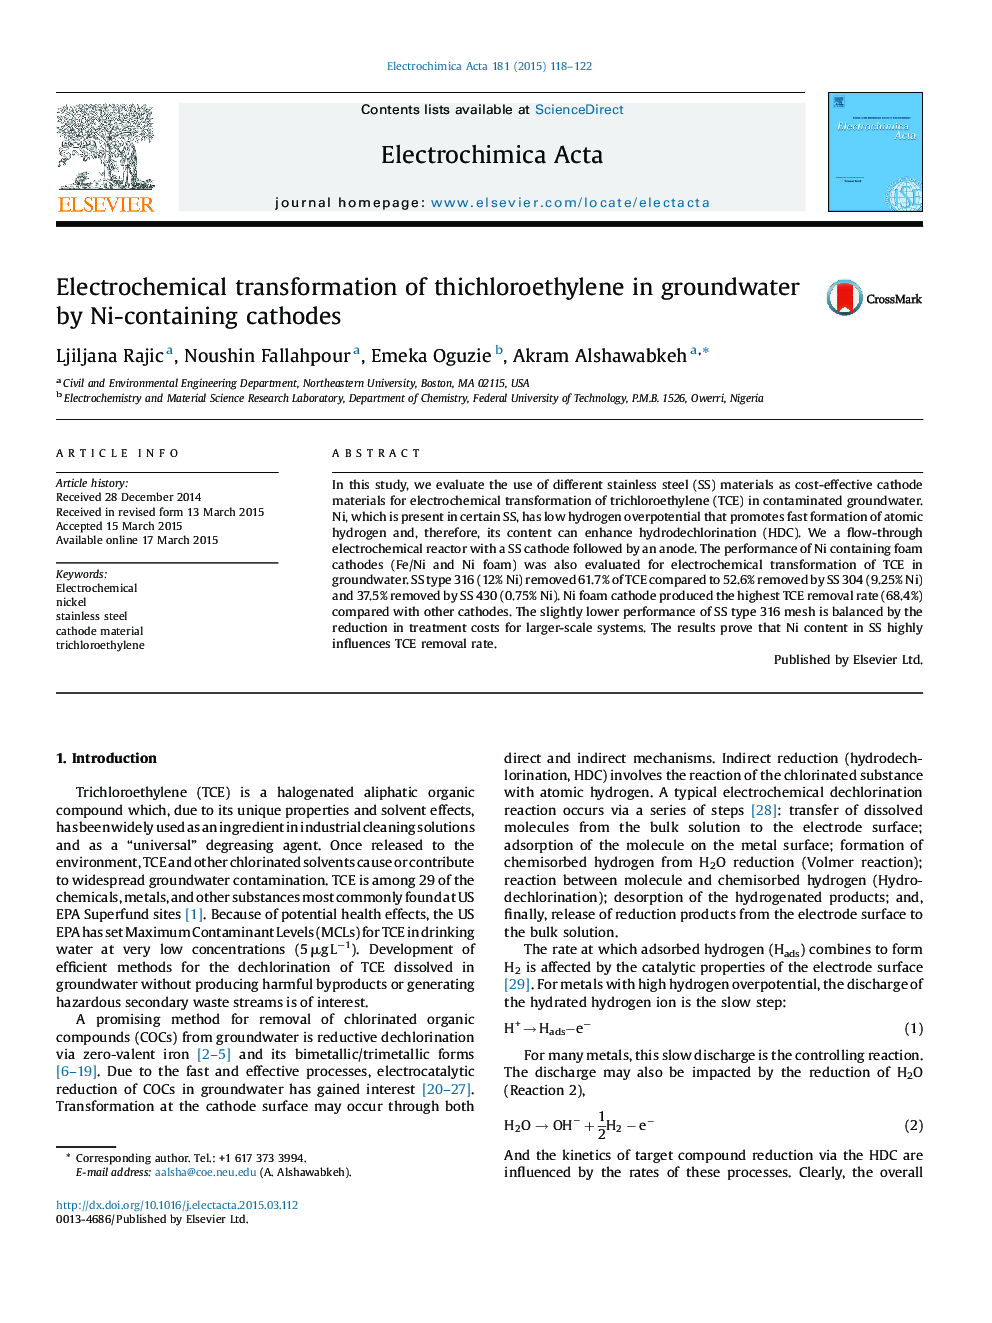 Electrochemical transformation of thichloroethylene in groundwater by Ni-containing cathodes